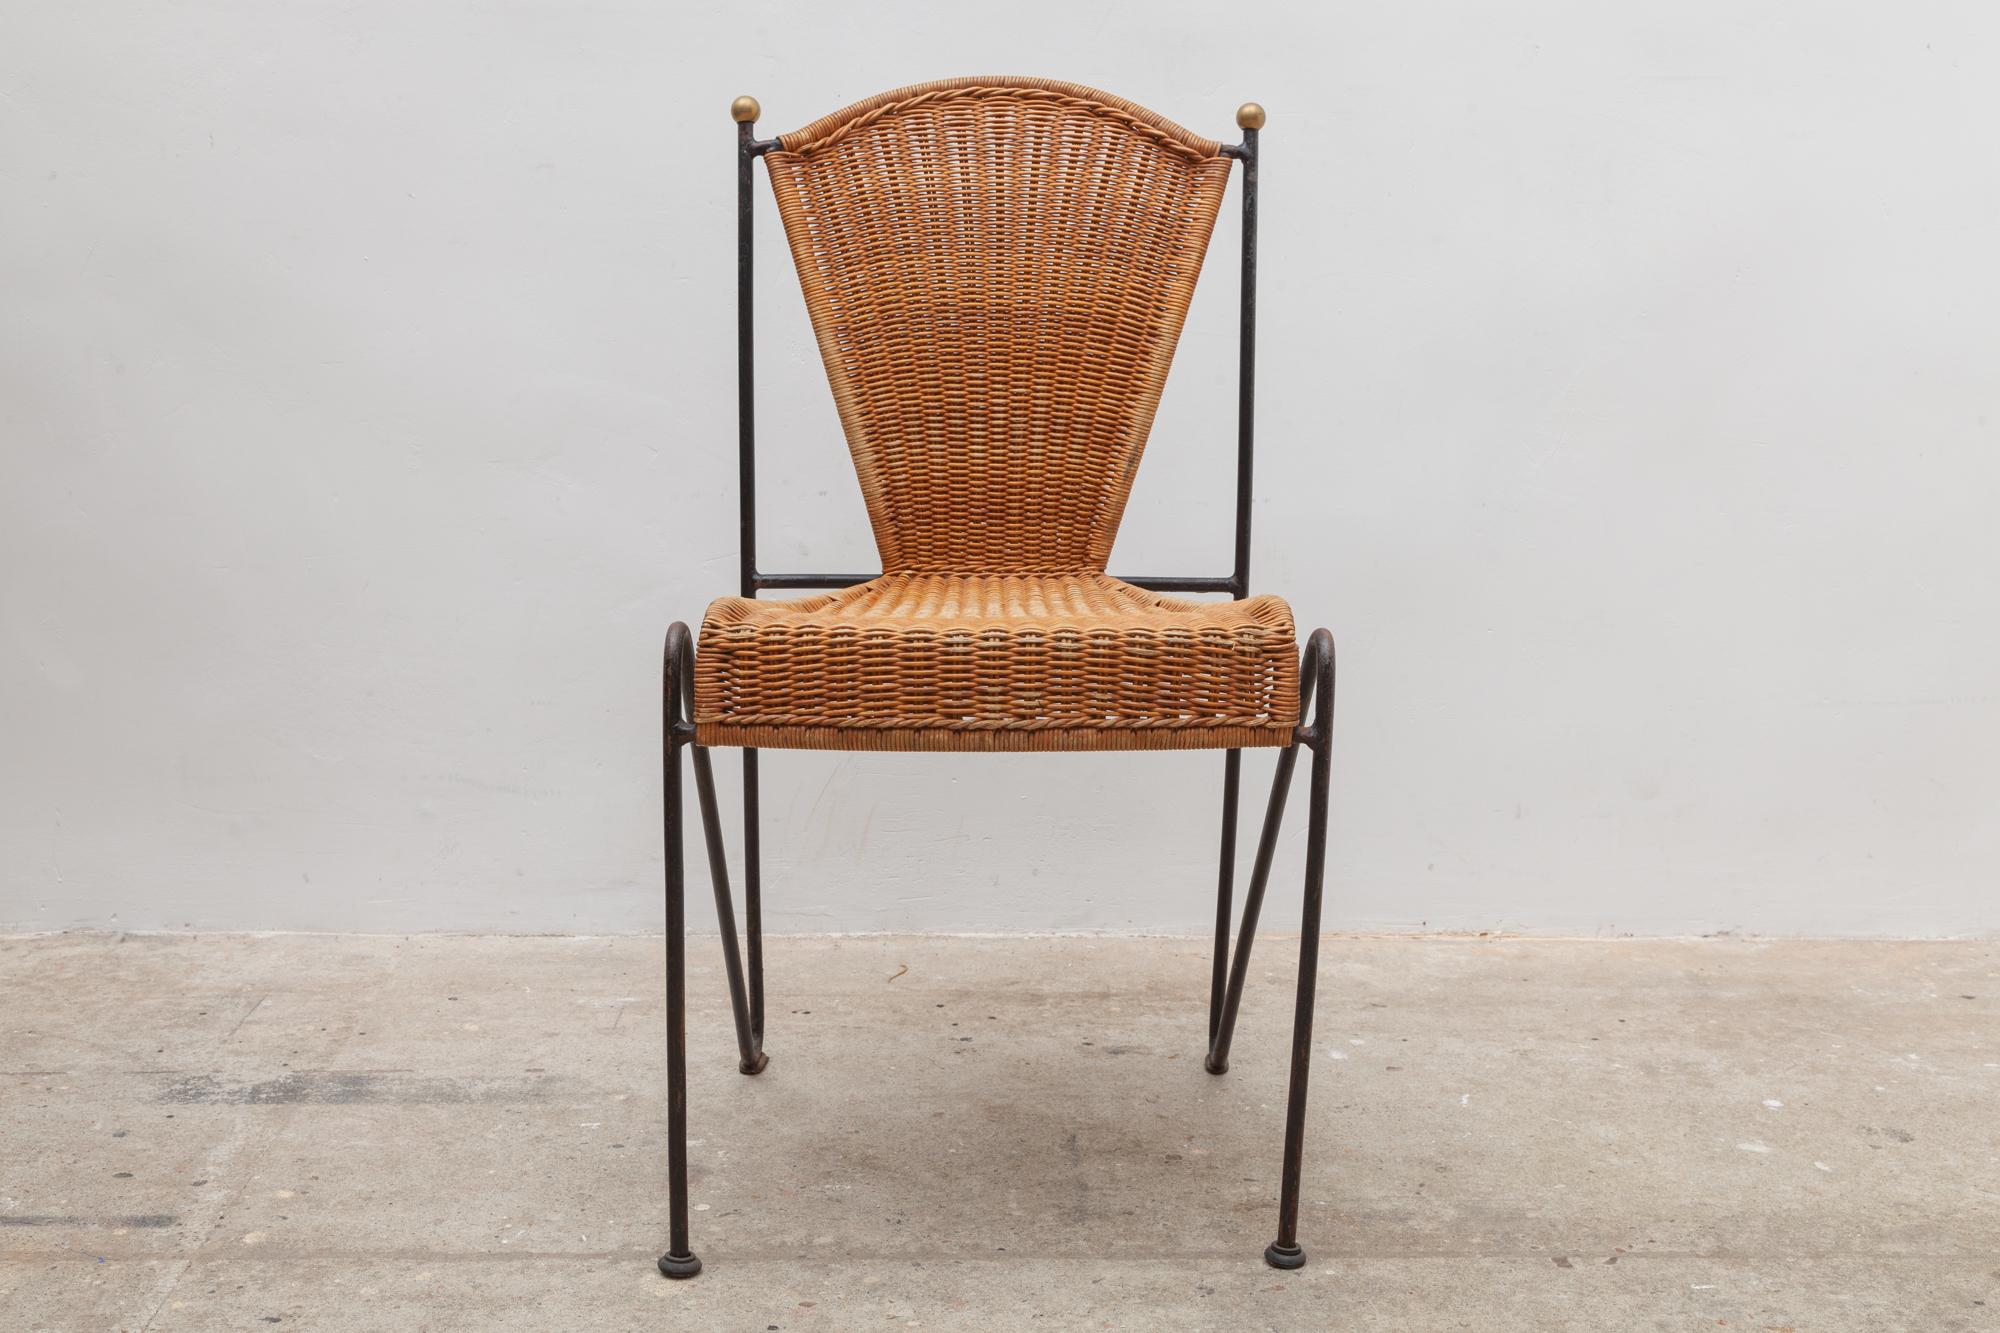 Vintage dining chair set indoor, outdoor dining chairs by designer Pipsan Saarinen Swanson for Ficks Reed.Sculptural black iron frames with gold ball ends. Woven rattan seats. Set of 8 chairs, two which have arm rests.
Dimensions:No armrests: 44W x